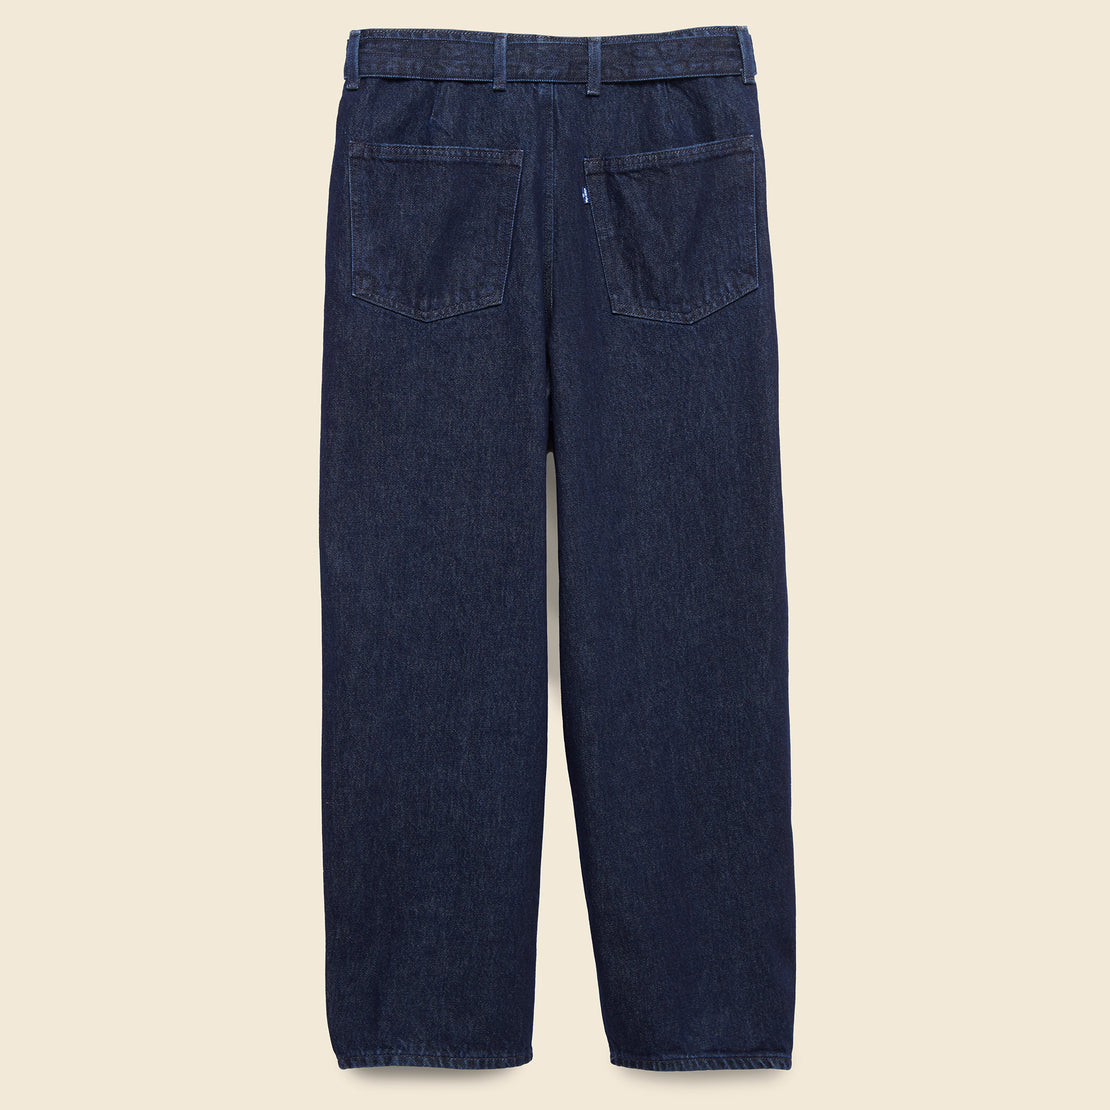 Carved Denim Trouser - Deep Rinse - Levis Made & Crafted - STAG Provisions - W - Pants - Denim